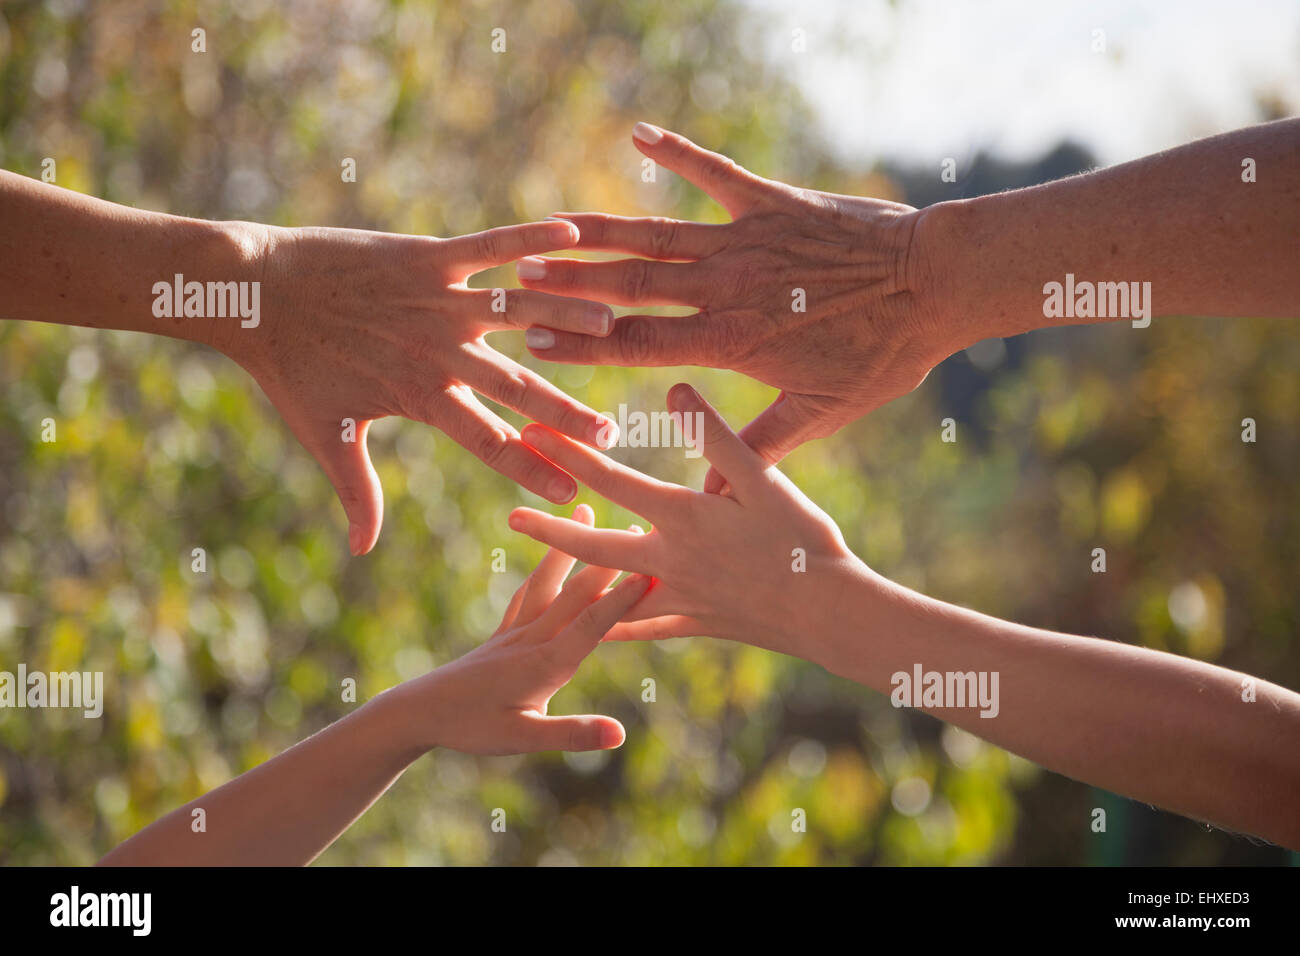 Close up of a family hands together against sunlight, Bavaria, Germany Stock Photo